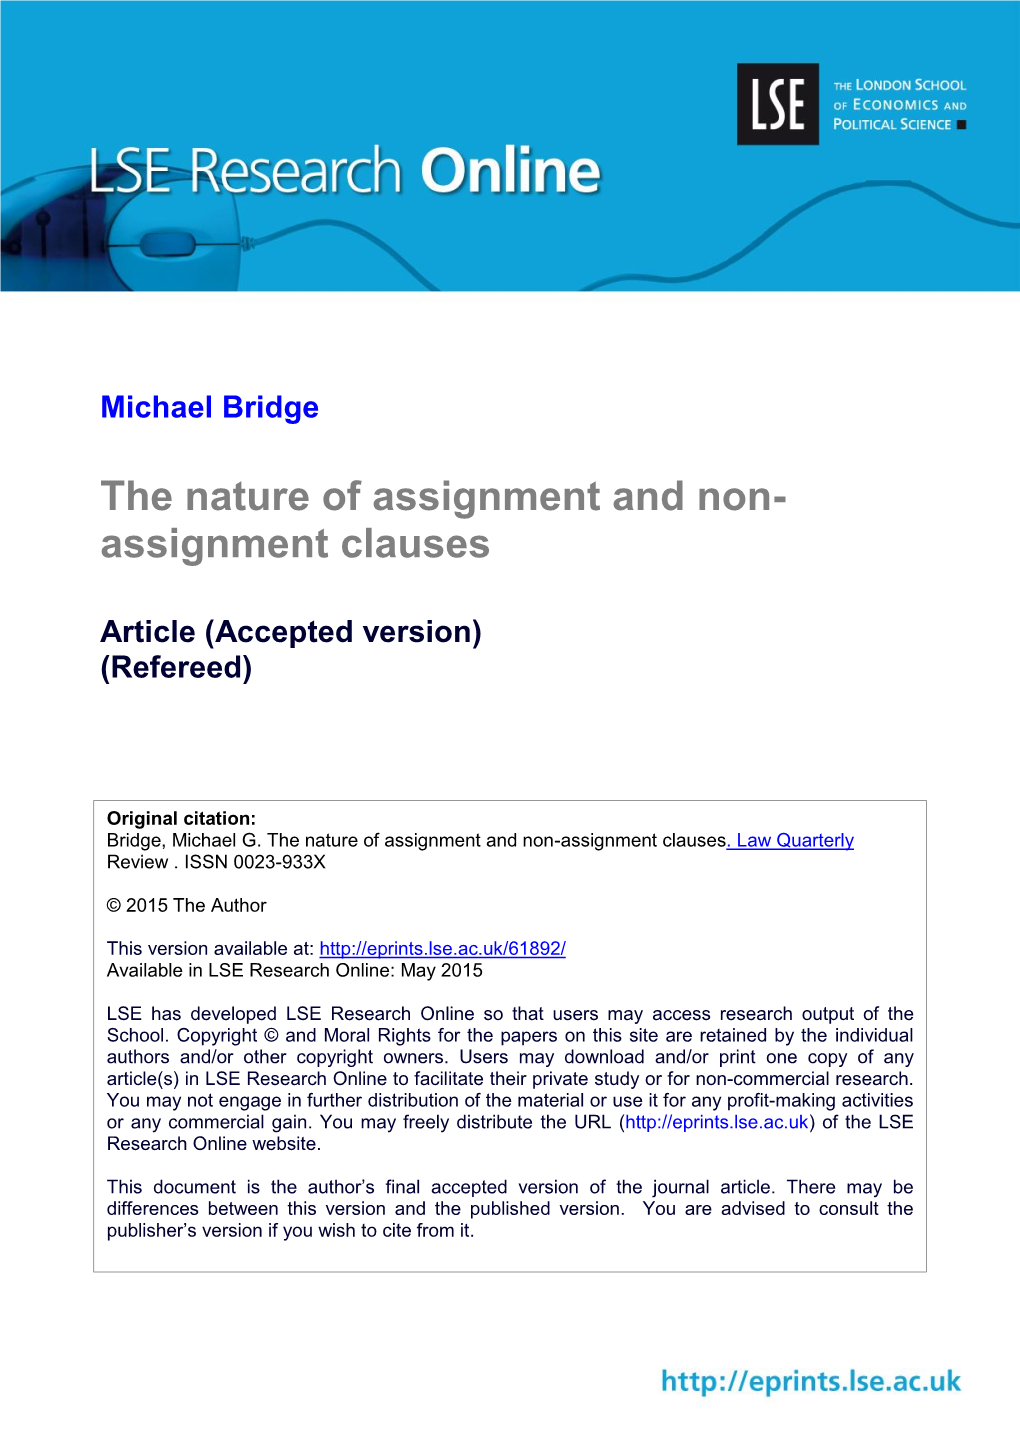 The Nature of Assignment and Non- Assignment Clauses